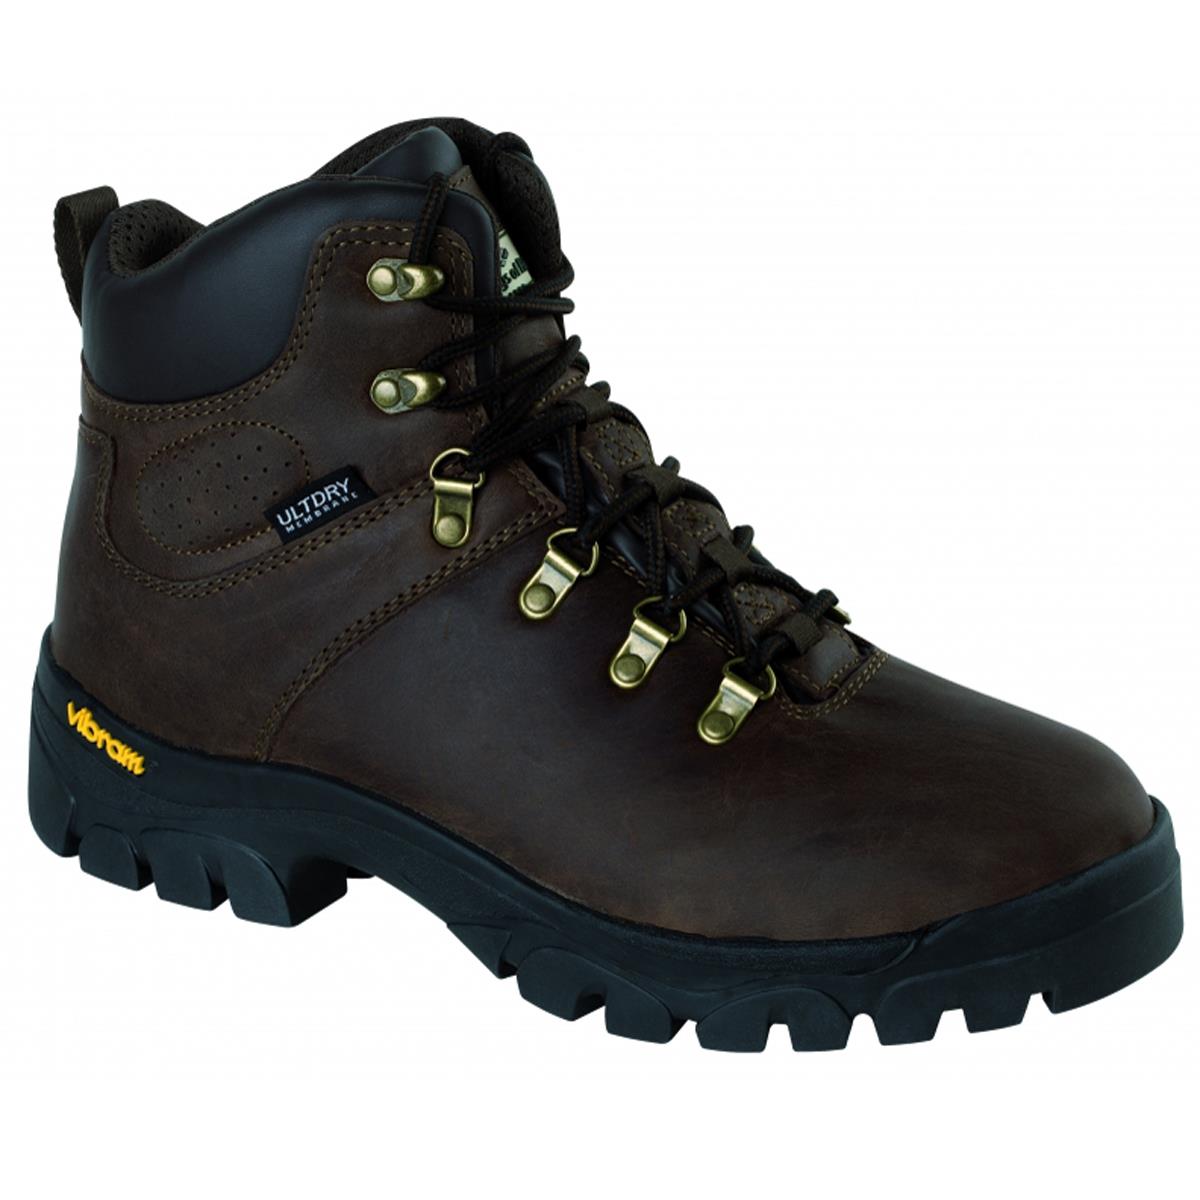 How much does the Higgs of Fife Monroe Classic Hiking boot weigh?